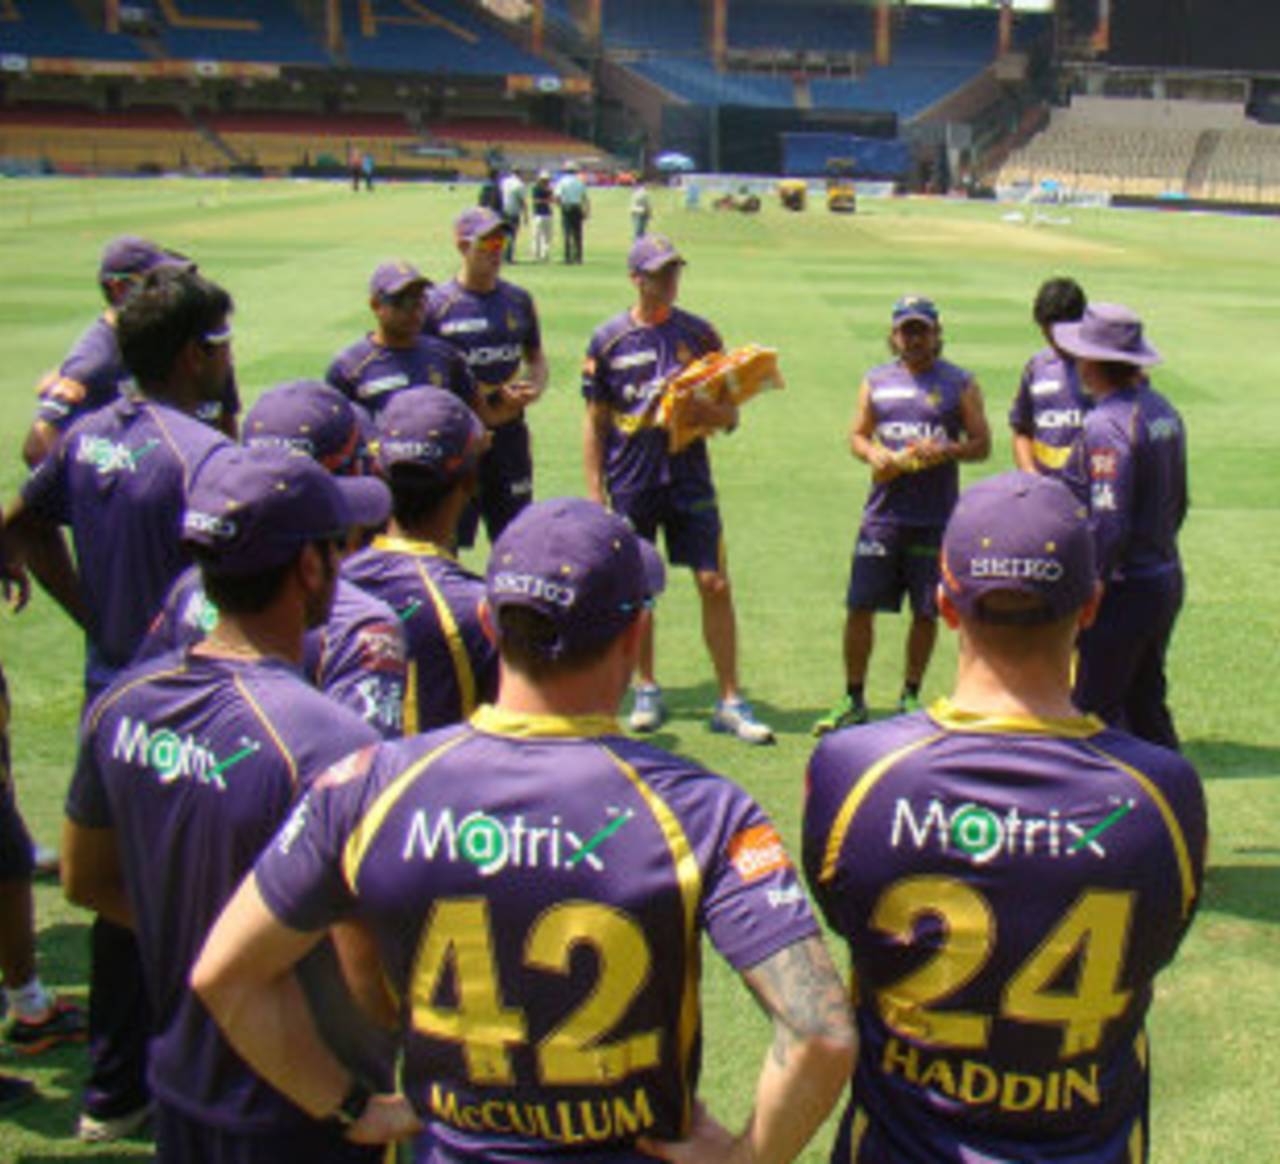 Adrian le Roux (pictured holding jackets), the team's conditioning coach, is a tireless worker&nbsp;&nbsp;&bull;&nbsp;&nbsp;Kolkata Knight Riders